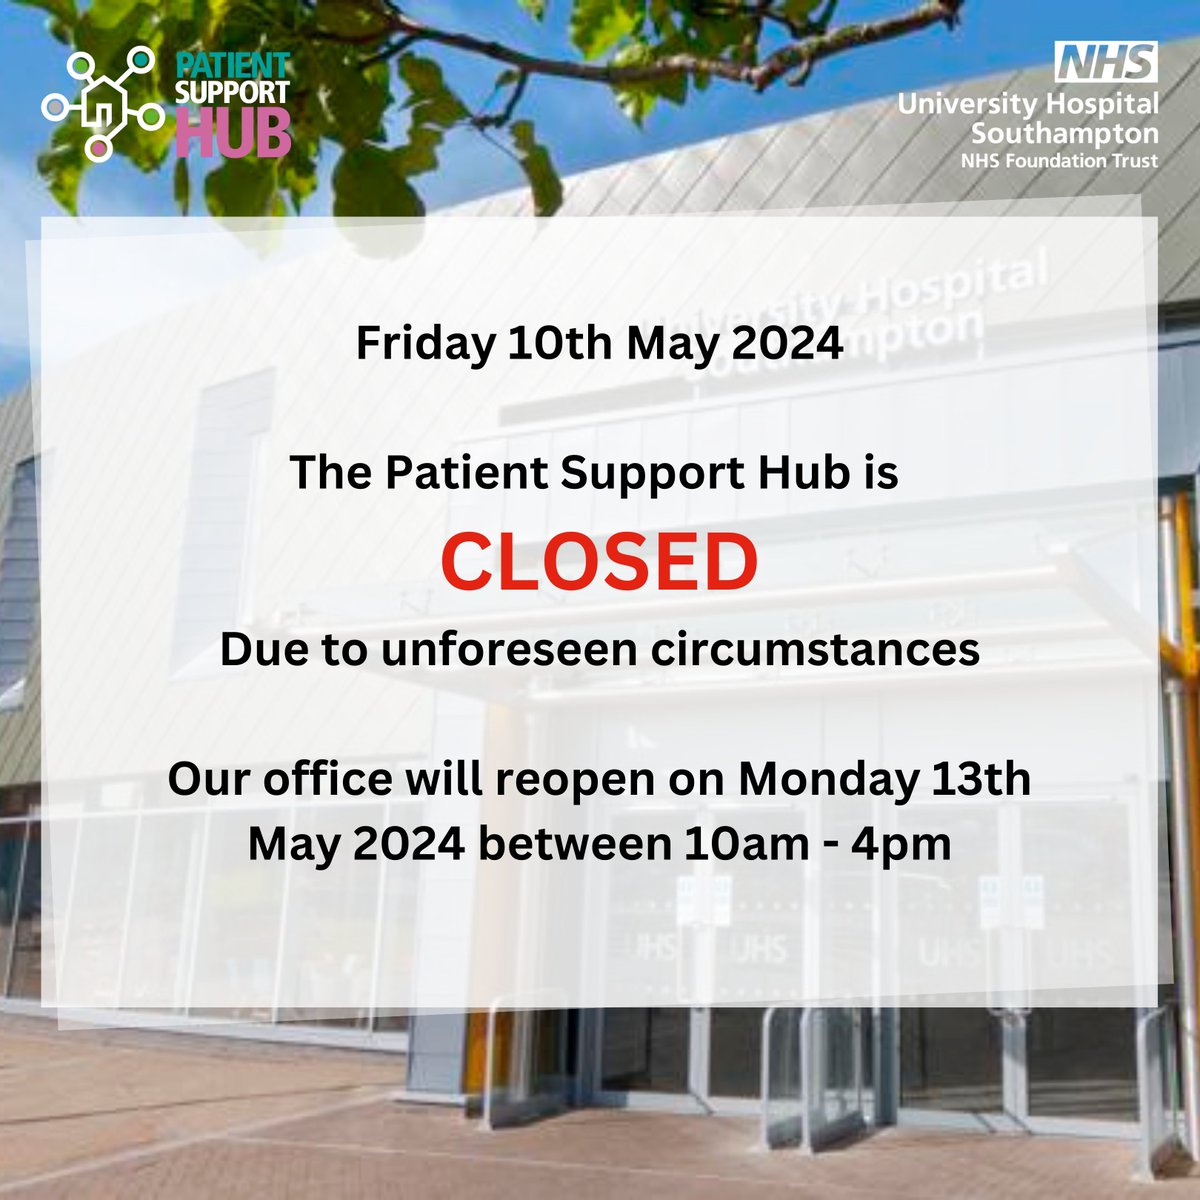 Please be advised that, due to unforeseen circumstances, The Patient Support Hub is closed on Friday 10th May 2024 at @UHSFT . Our office will reopen as normal on Monday 13th May between 10am and 4pm.